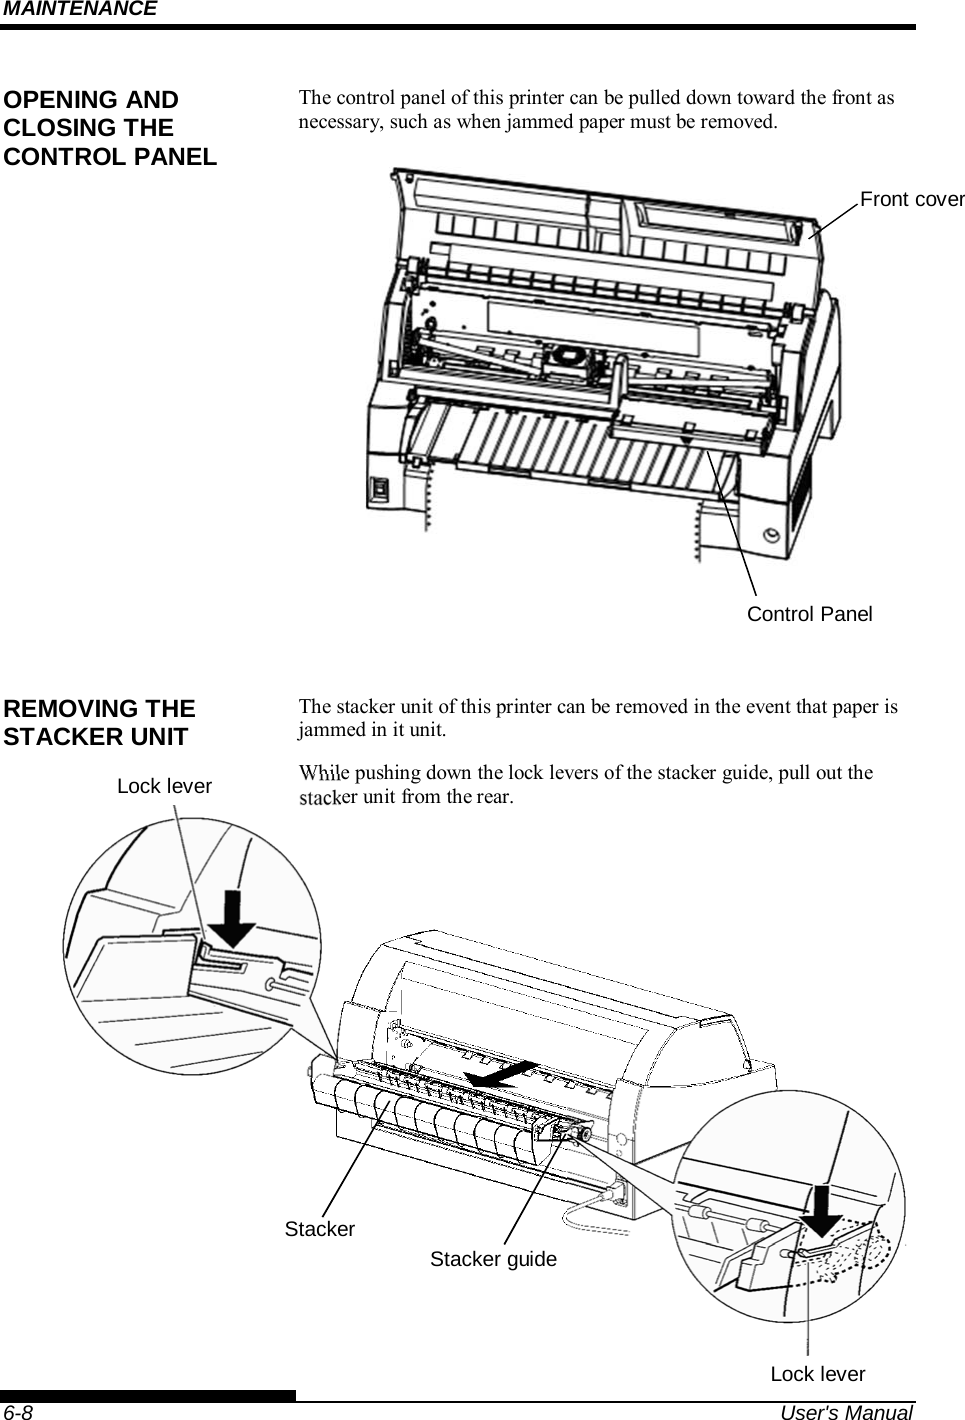 MAINTENANCE    6-8  User&apos;s Manual The control panel of this printer can be pulled down toward the front as necessary, such as when jammed paper must be removed.     The stacker unit of this printer can be removed in the event that paper is jammed in it unit. While pushing down the lock levers of the stacker guide, pull out the stacker unit from the rear.     OPENING AND CLOSING THE CONTROL PANEL REMOVING THE STACKER UNIT Front coverControl Panel Stacker guideLock lever Stacker Lock lever 